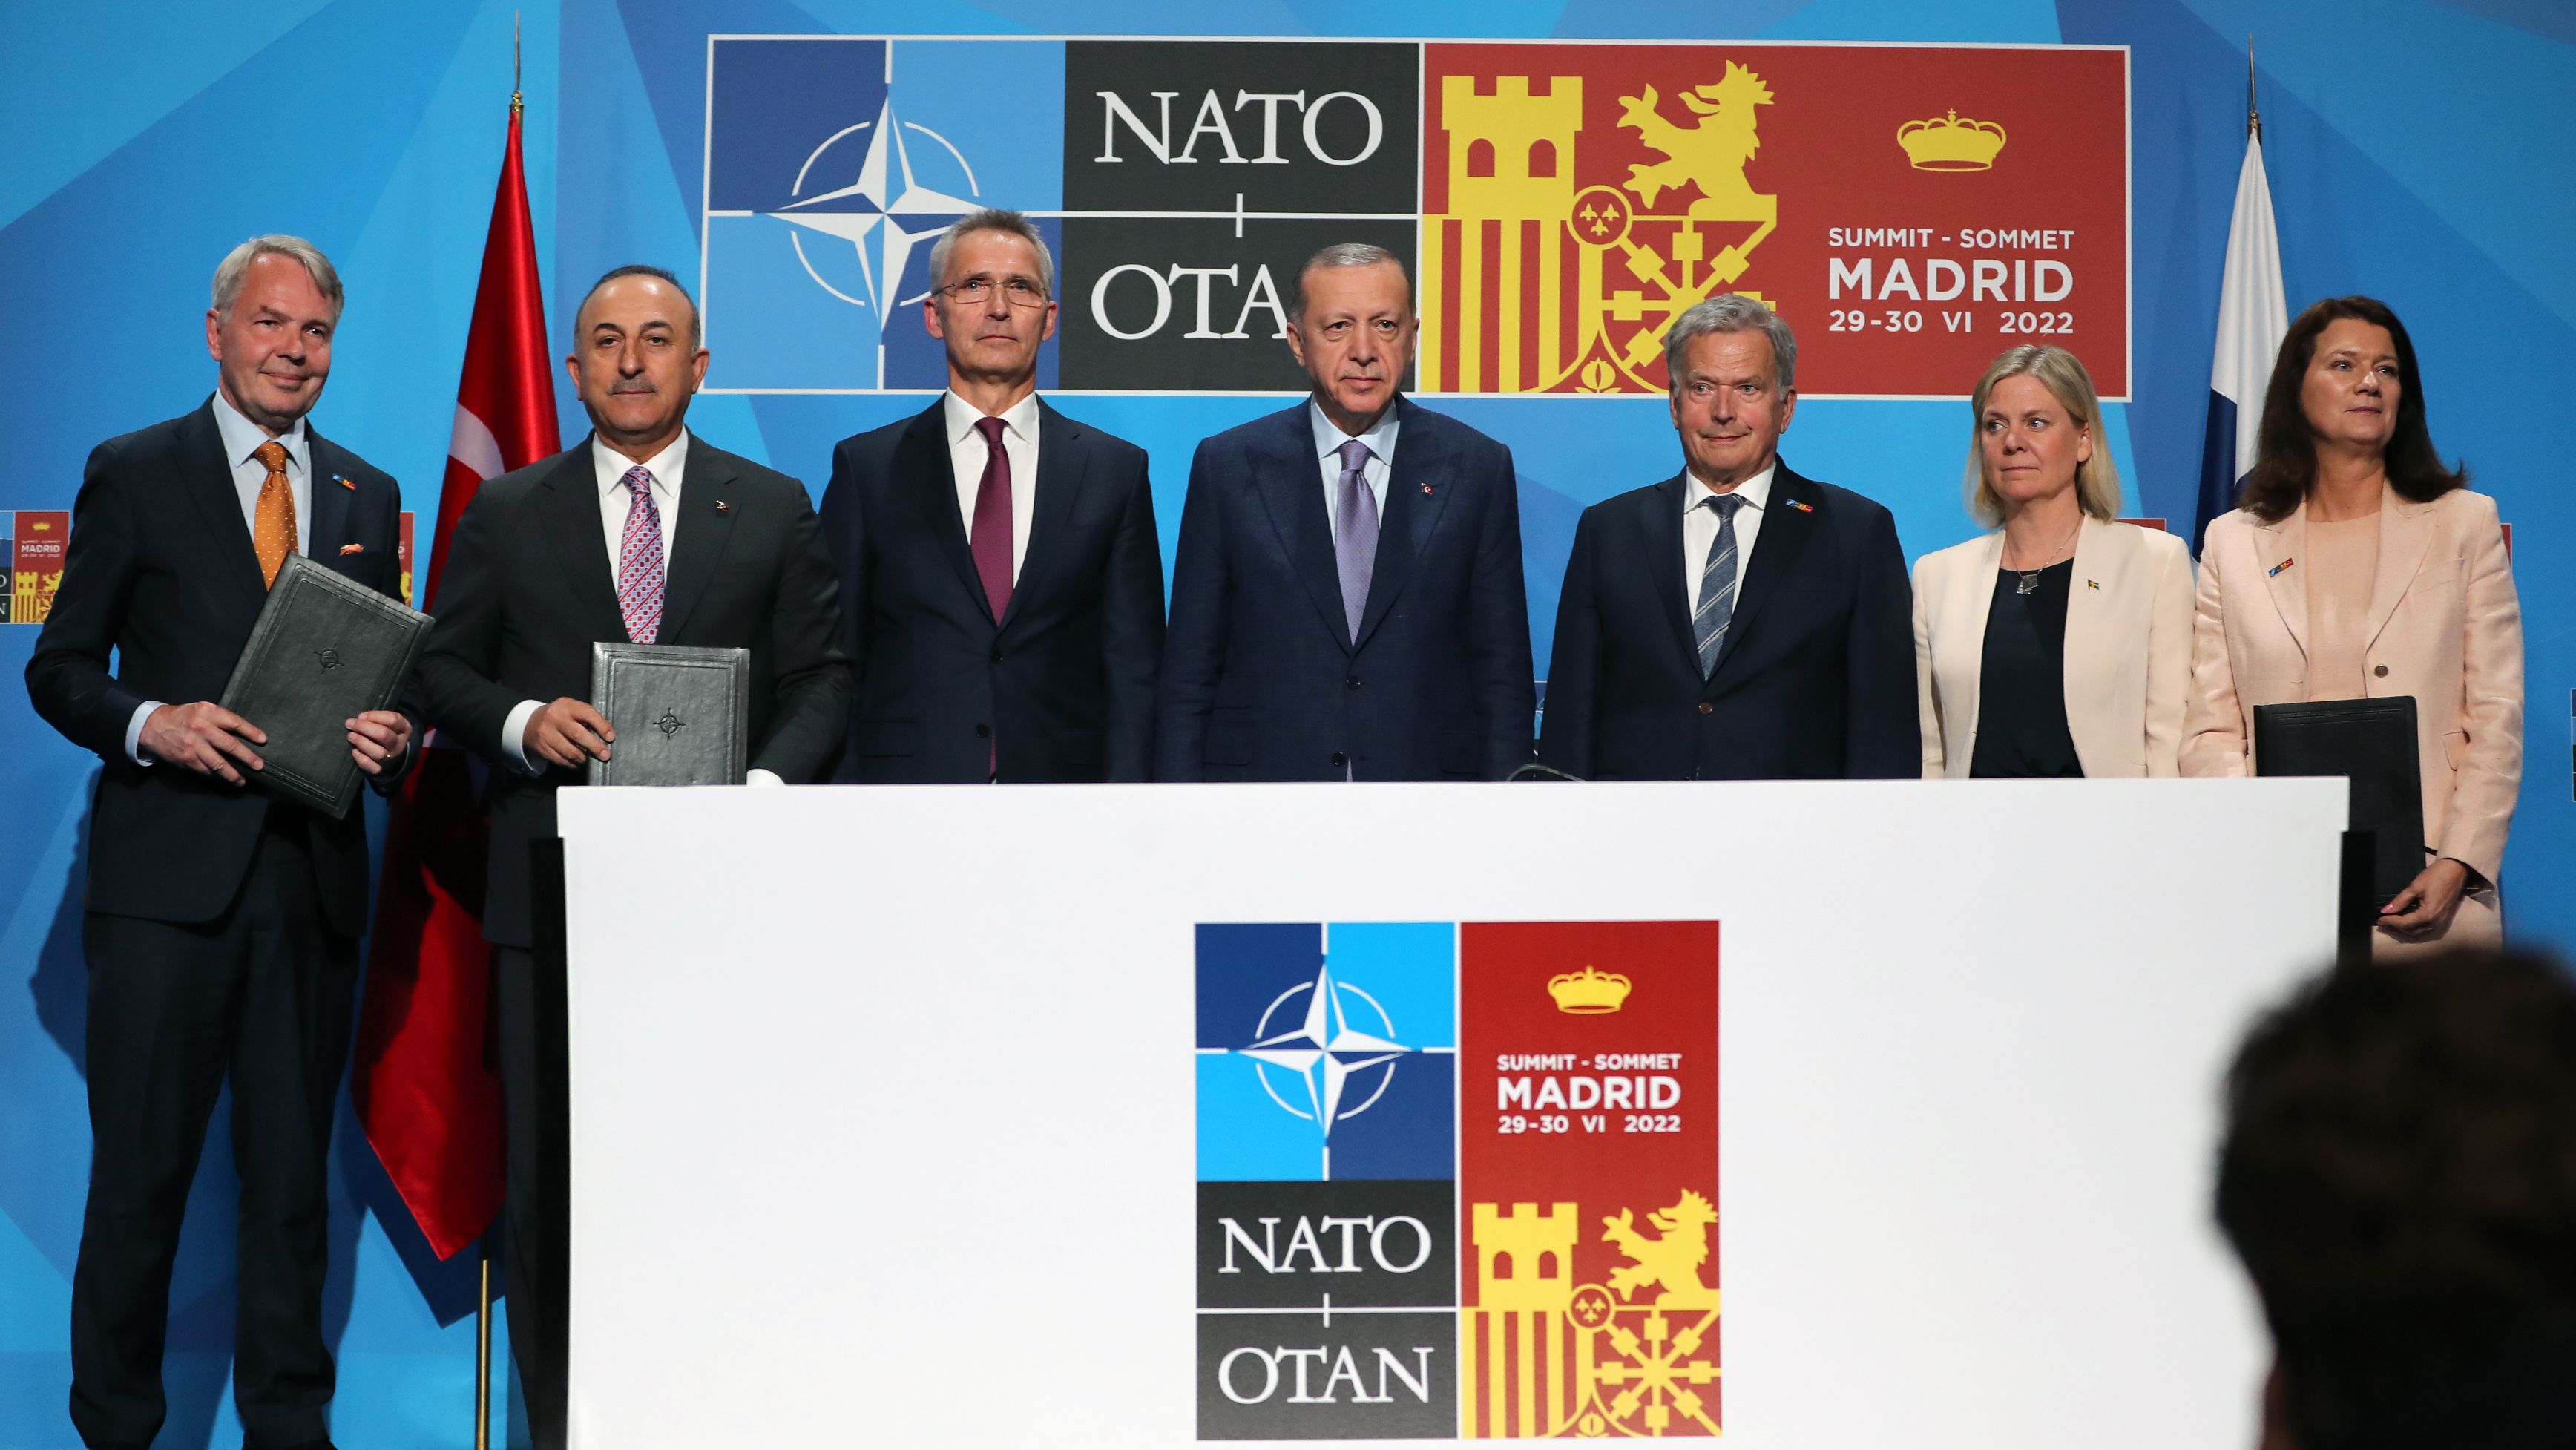 Turkish President Recep Tayyip Erdogan (center), NATO Secretary-General Jens Stoltenberg (third from left), Finland's President Sauli Niinisto (fifth from left), Sweden's Prime Minister Magdalena Andersson (sixth from left) and other officials attend a signing ceremony of a memorandum on the Nordic countries' NATO bids in Madrid, Spain on June 28.